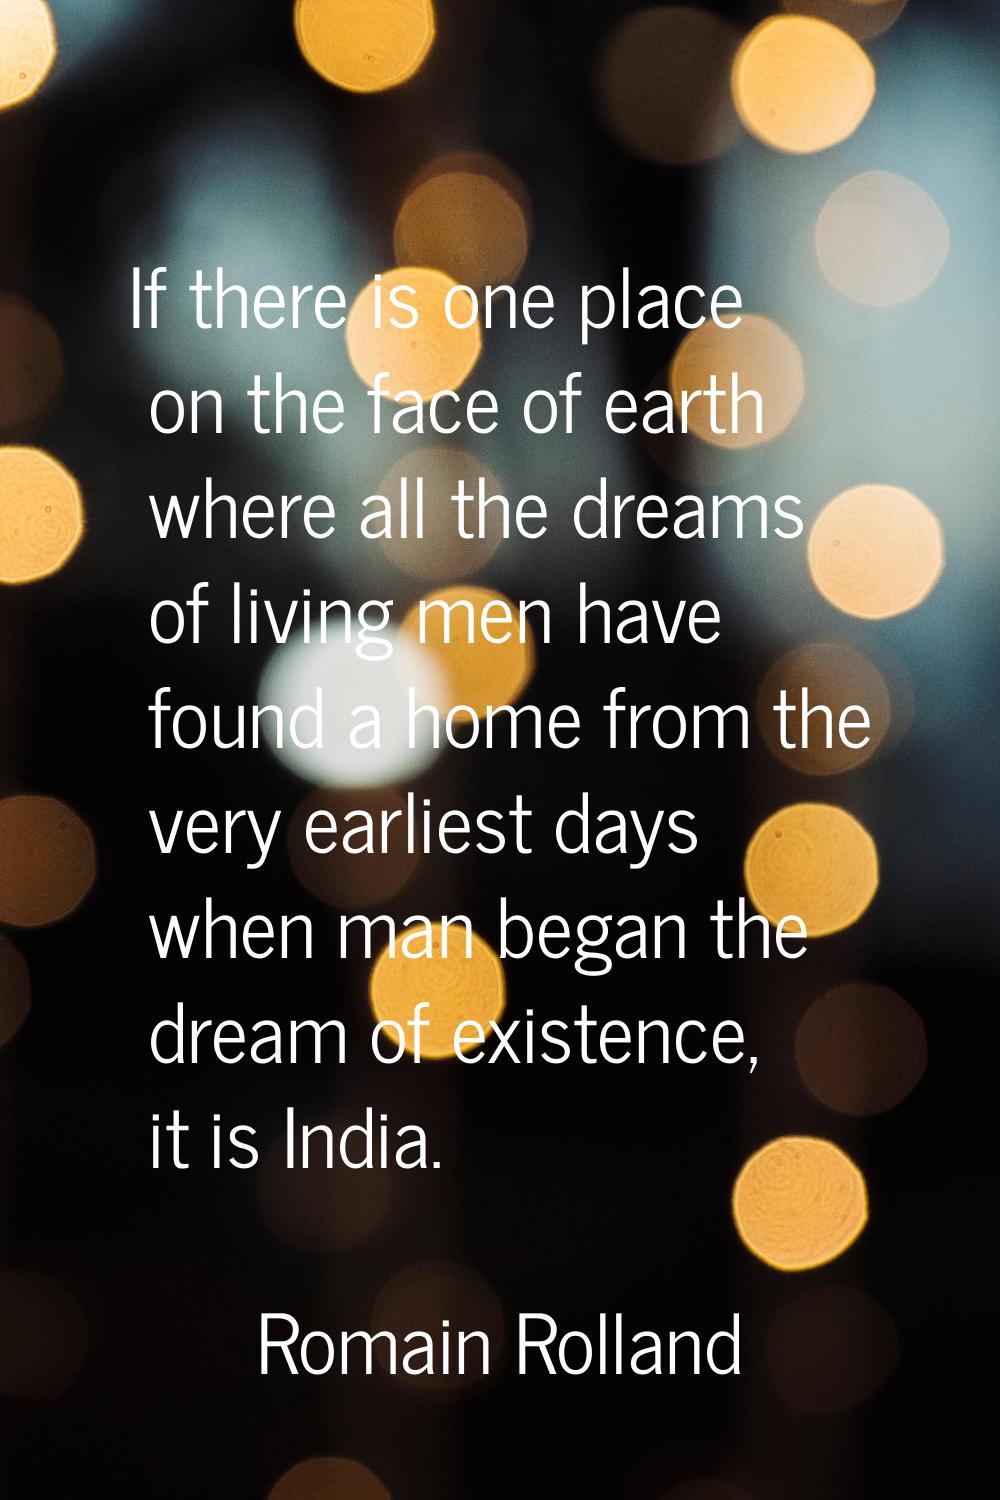 If there is one place on the face of earth where all the dreams of living men have found a home fro